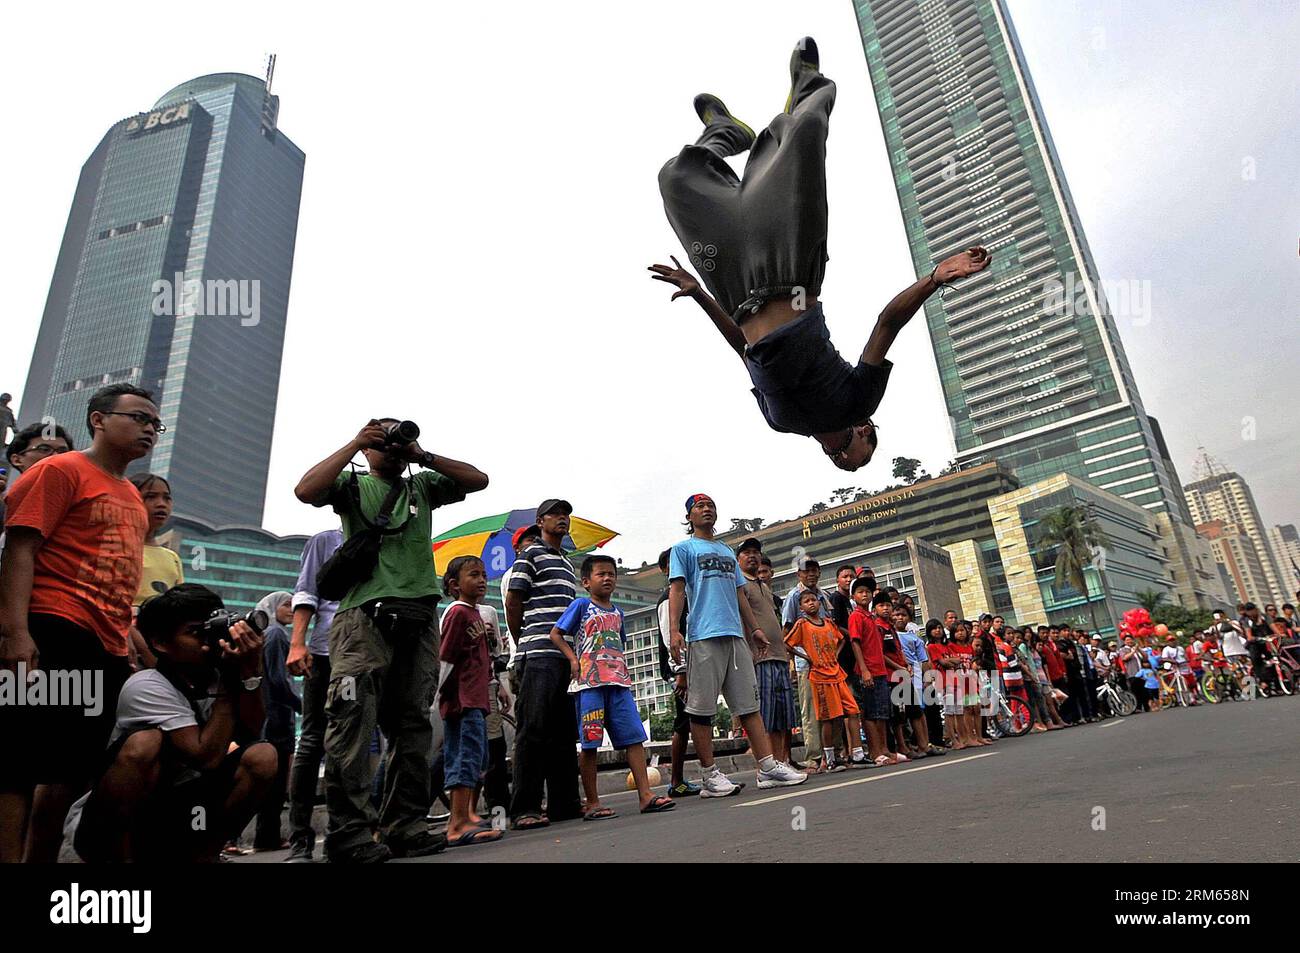 Bildnummer: 60806604  Datum: 08.12.2013  Copyright: imago/Xinhua     A man from Indonesian Jumper community stages some parkour and free run skills during the car free day in Jakarta, Indonesia, Dec. 8, 2013. (Xinhua/Agung Kuncahya B.) INDONESIA-JAKARTA-CAR FREE DAY PUBLICATIONxNOTxINxCHN xcb x0x 2013 quer Stock Photo